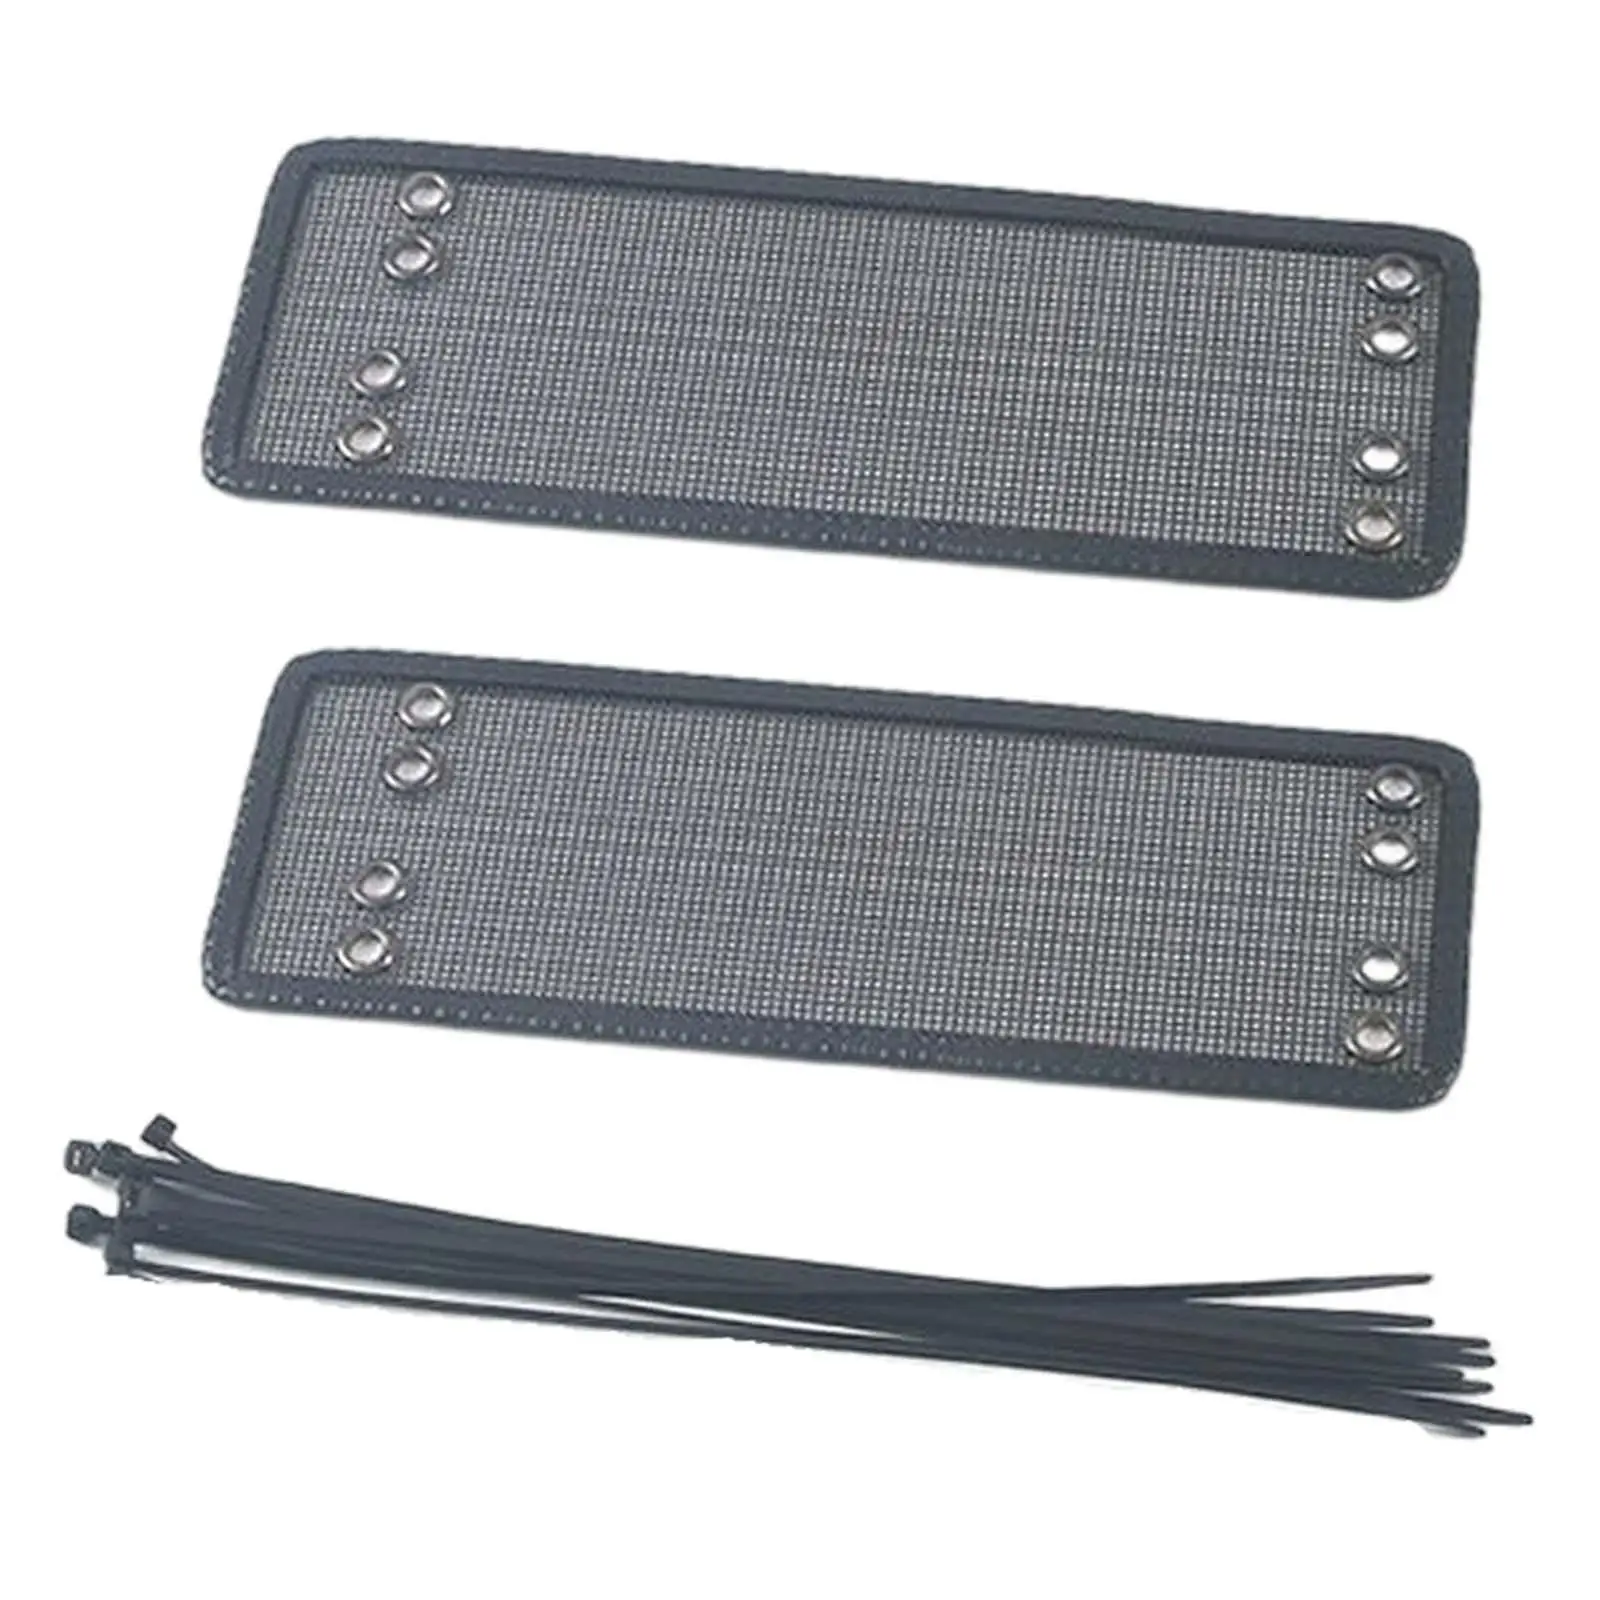 Front Grille Net cover Accessories for Byd Atto 3 21 Accessories